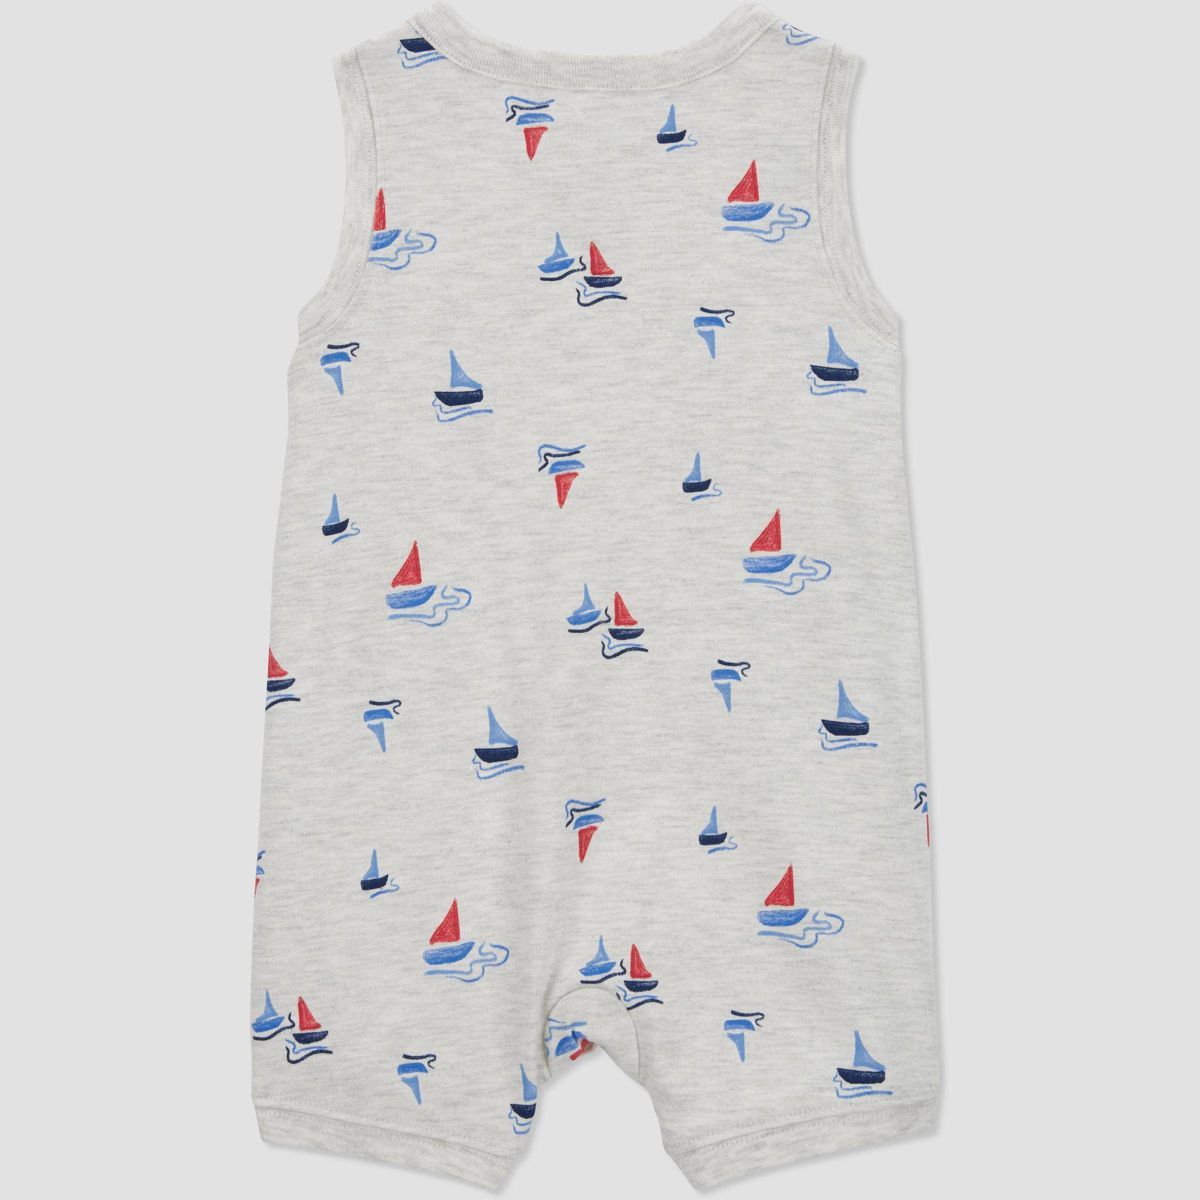 Carter's Just One You®️ Baby Boys' Sailboat Jumpsuit - Gray | Target